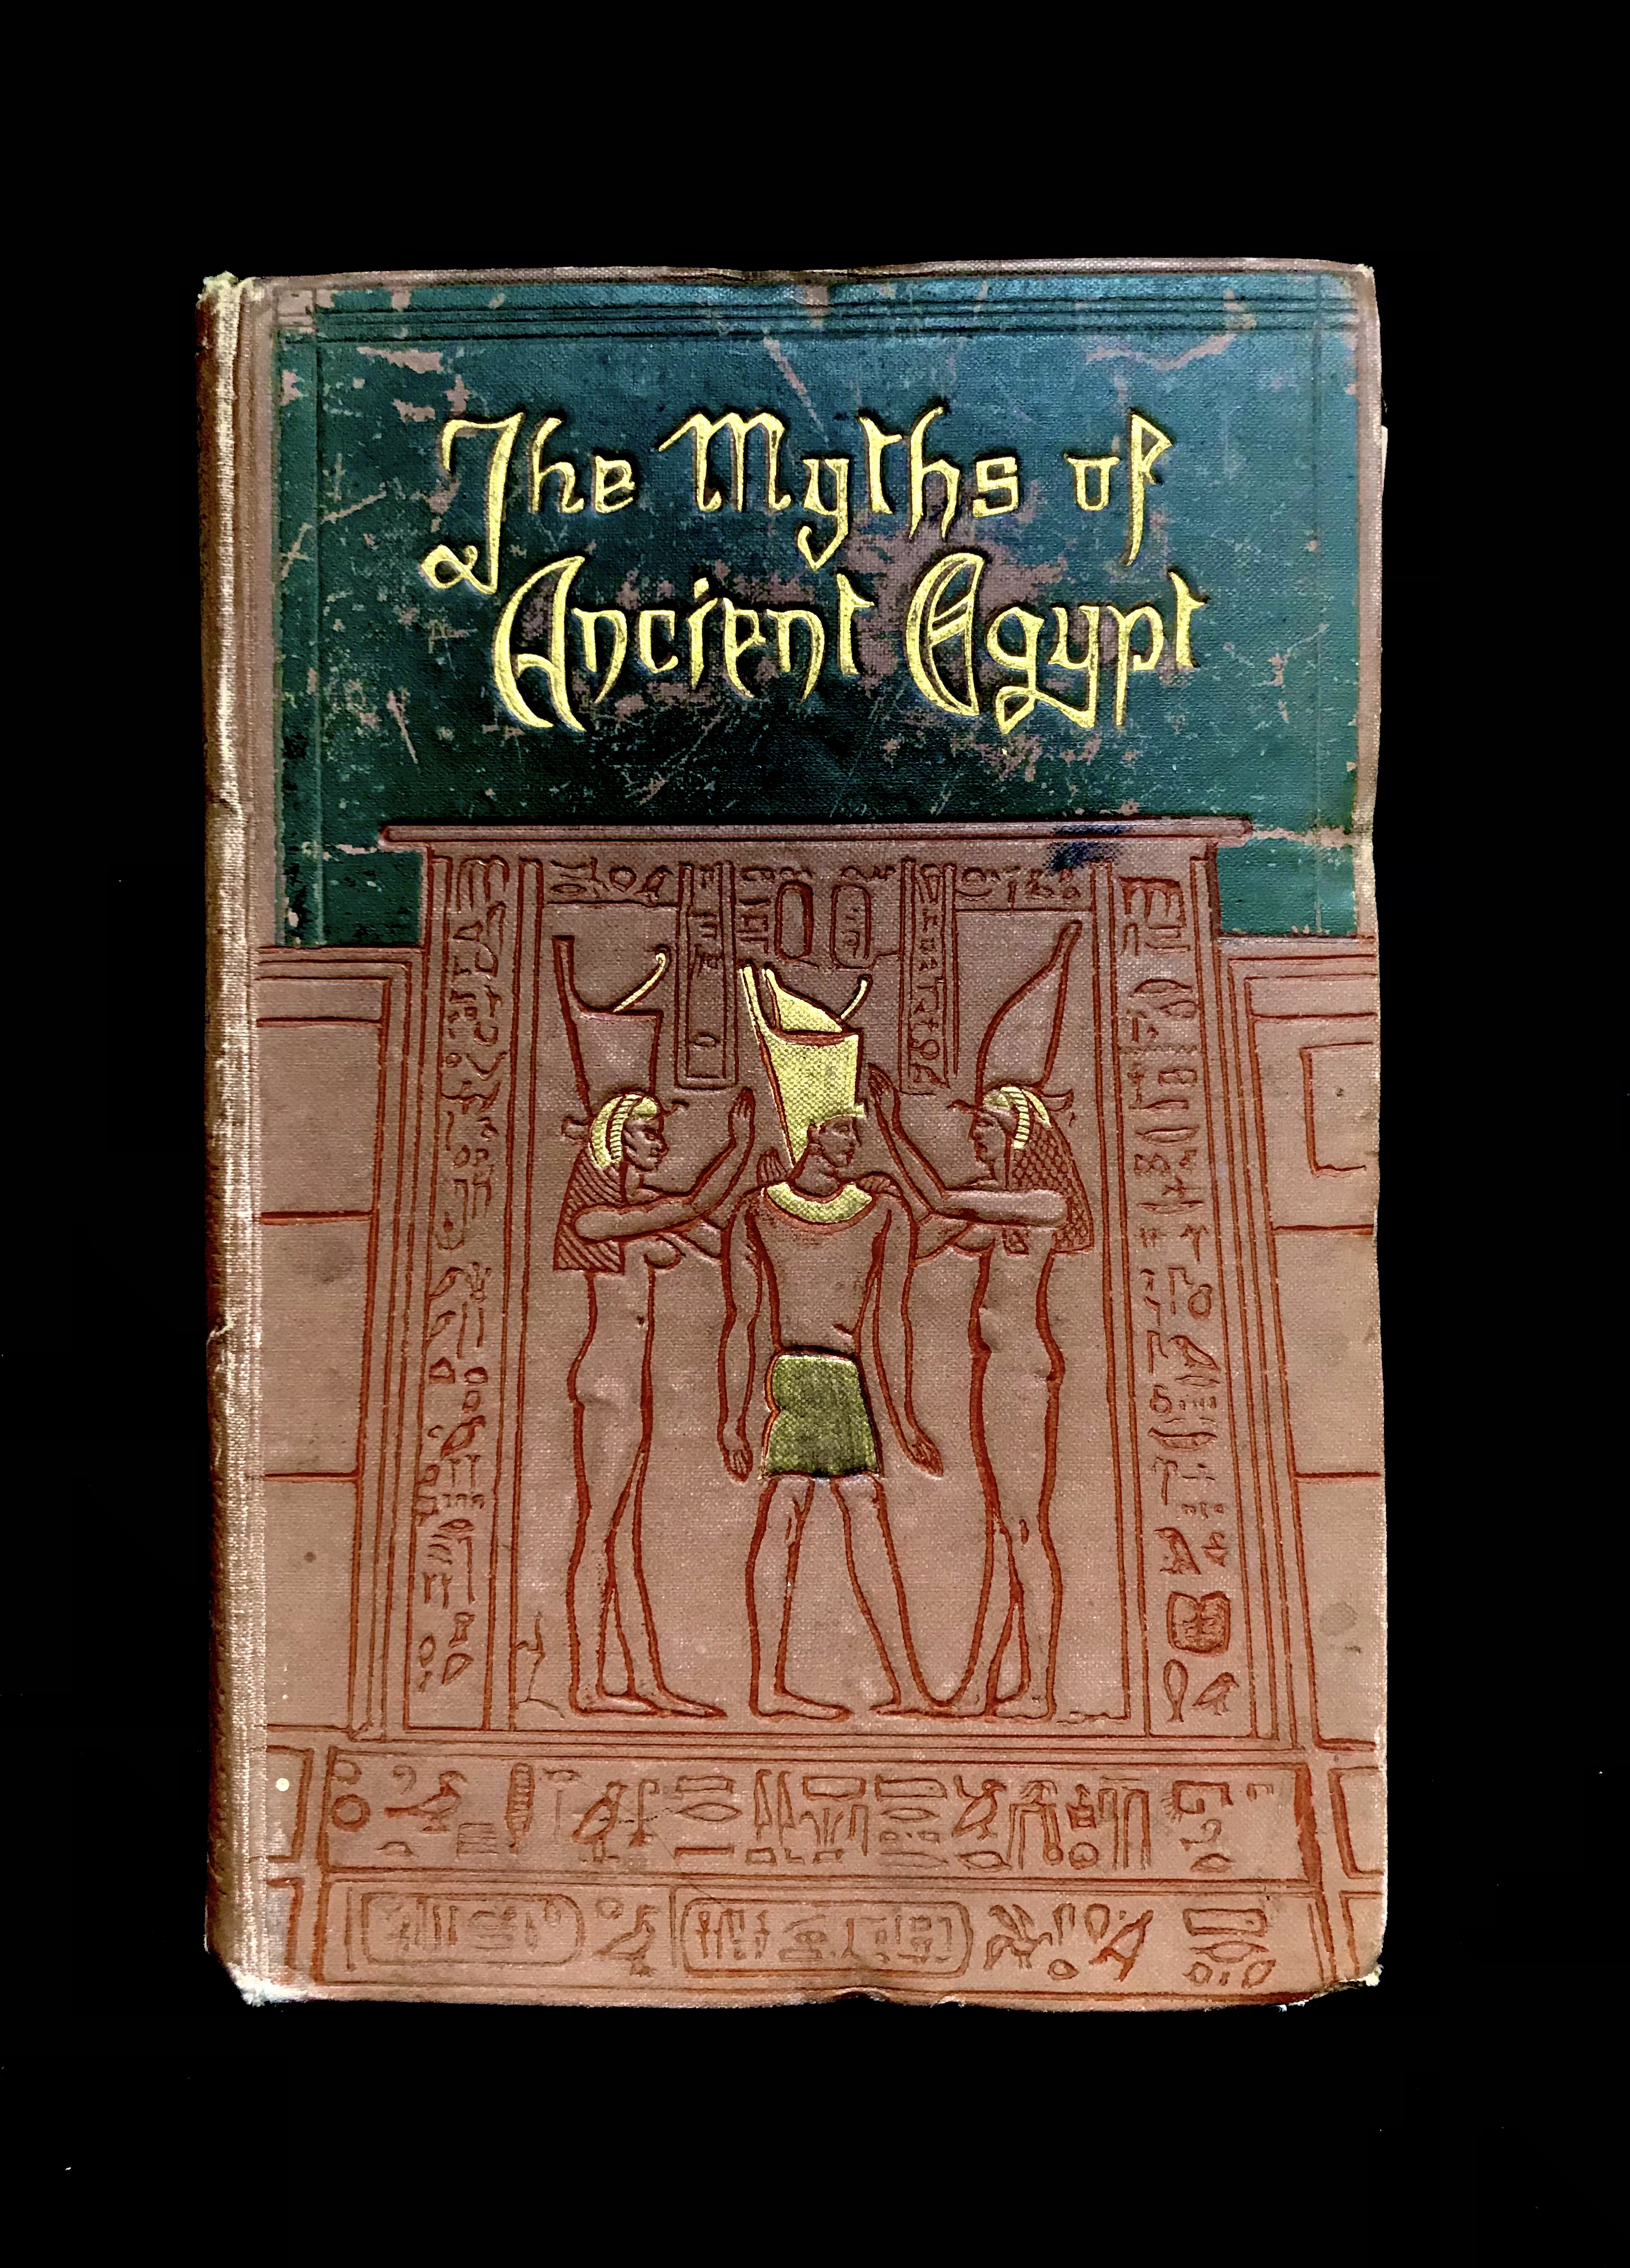 The Myths of Ancient Egypt by Lewis Spence